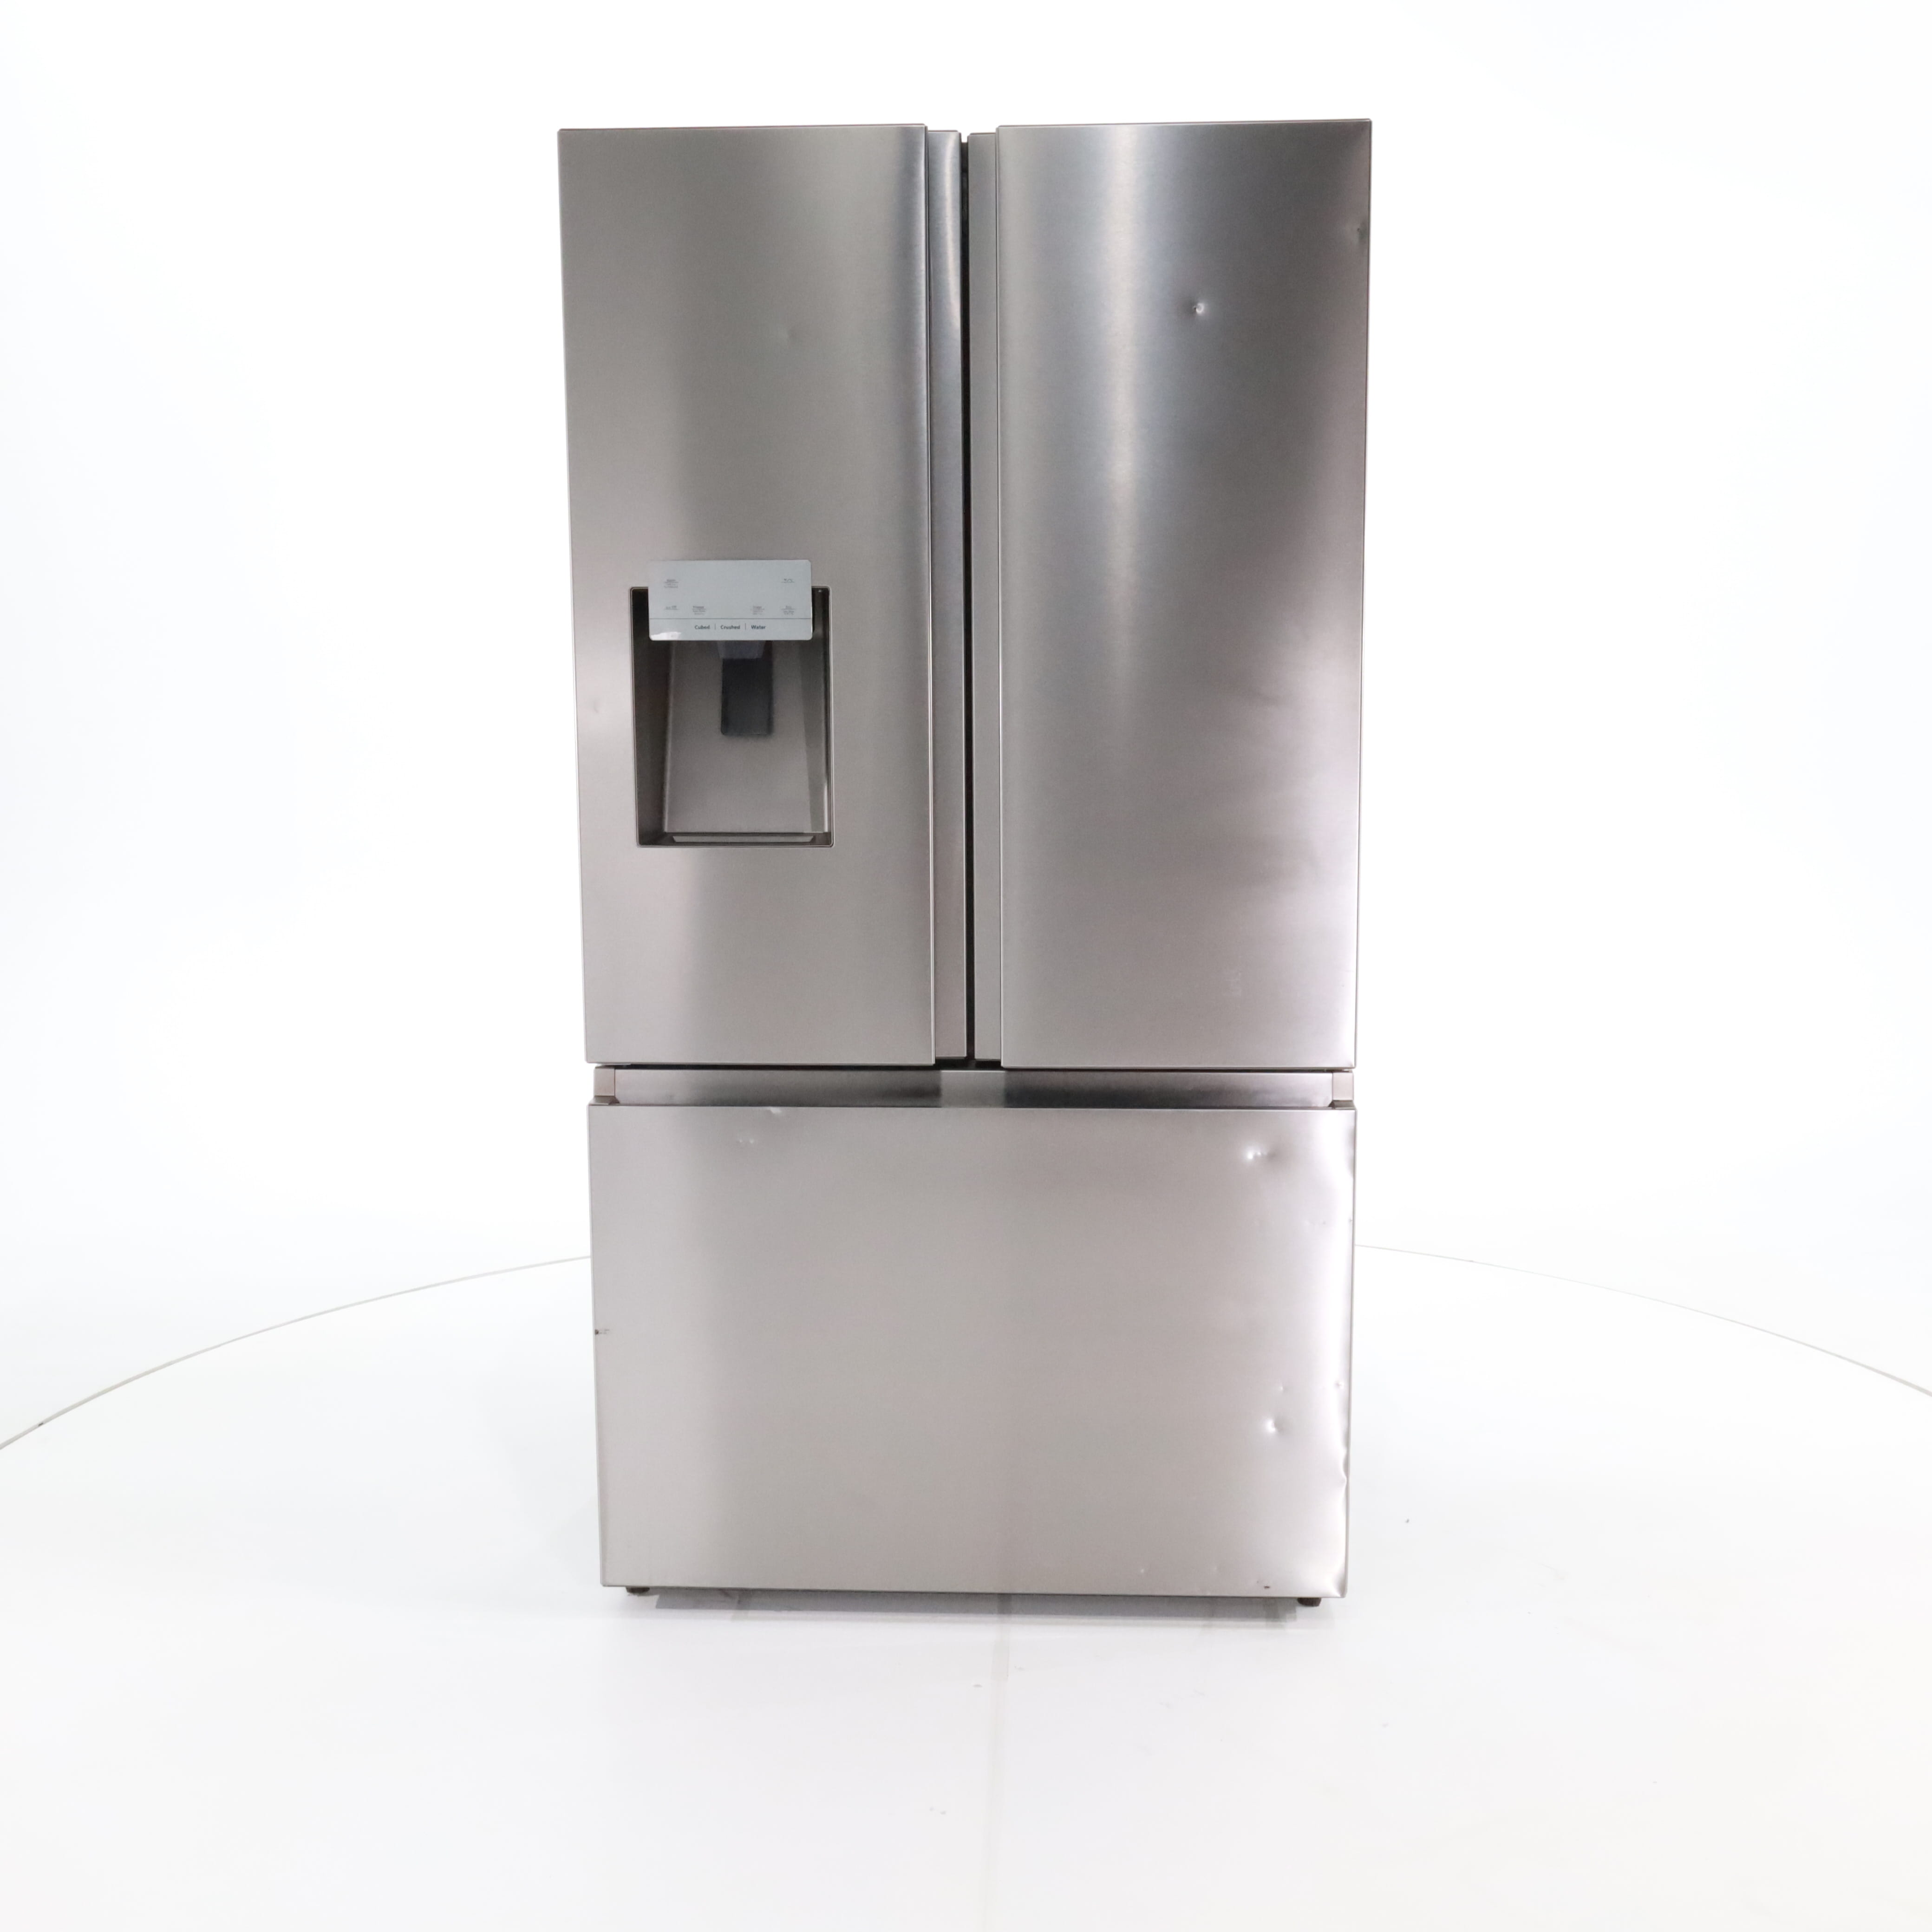 Pictures of Fingerprint Resistant Stainless Steel ENERGY STAR Hisense 25.4 cu. ft. 3 Door Refrigerator with Water and Ice Dispenser- Scratch & Dent - Moderate - Neu Appliance Outlet - Discount Appliance Outlet in Austin, Tx